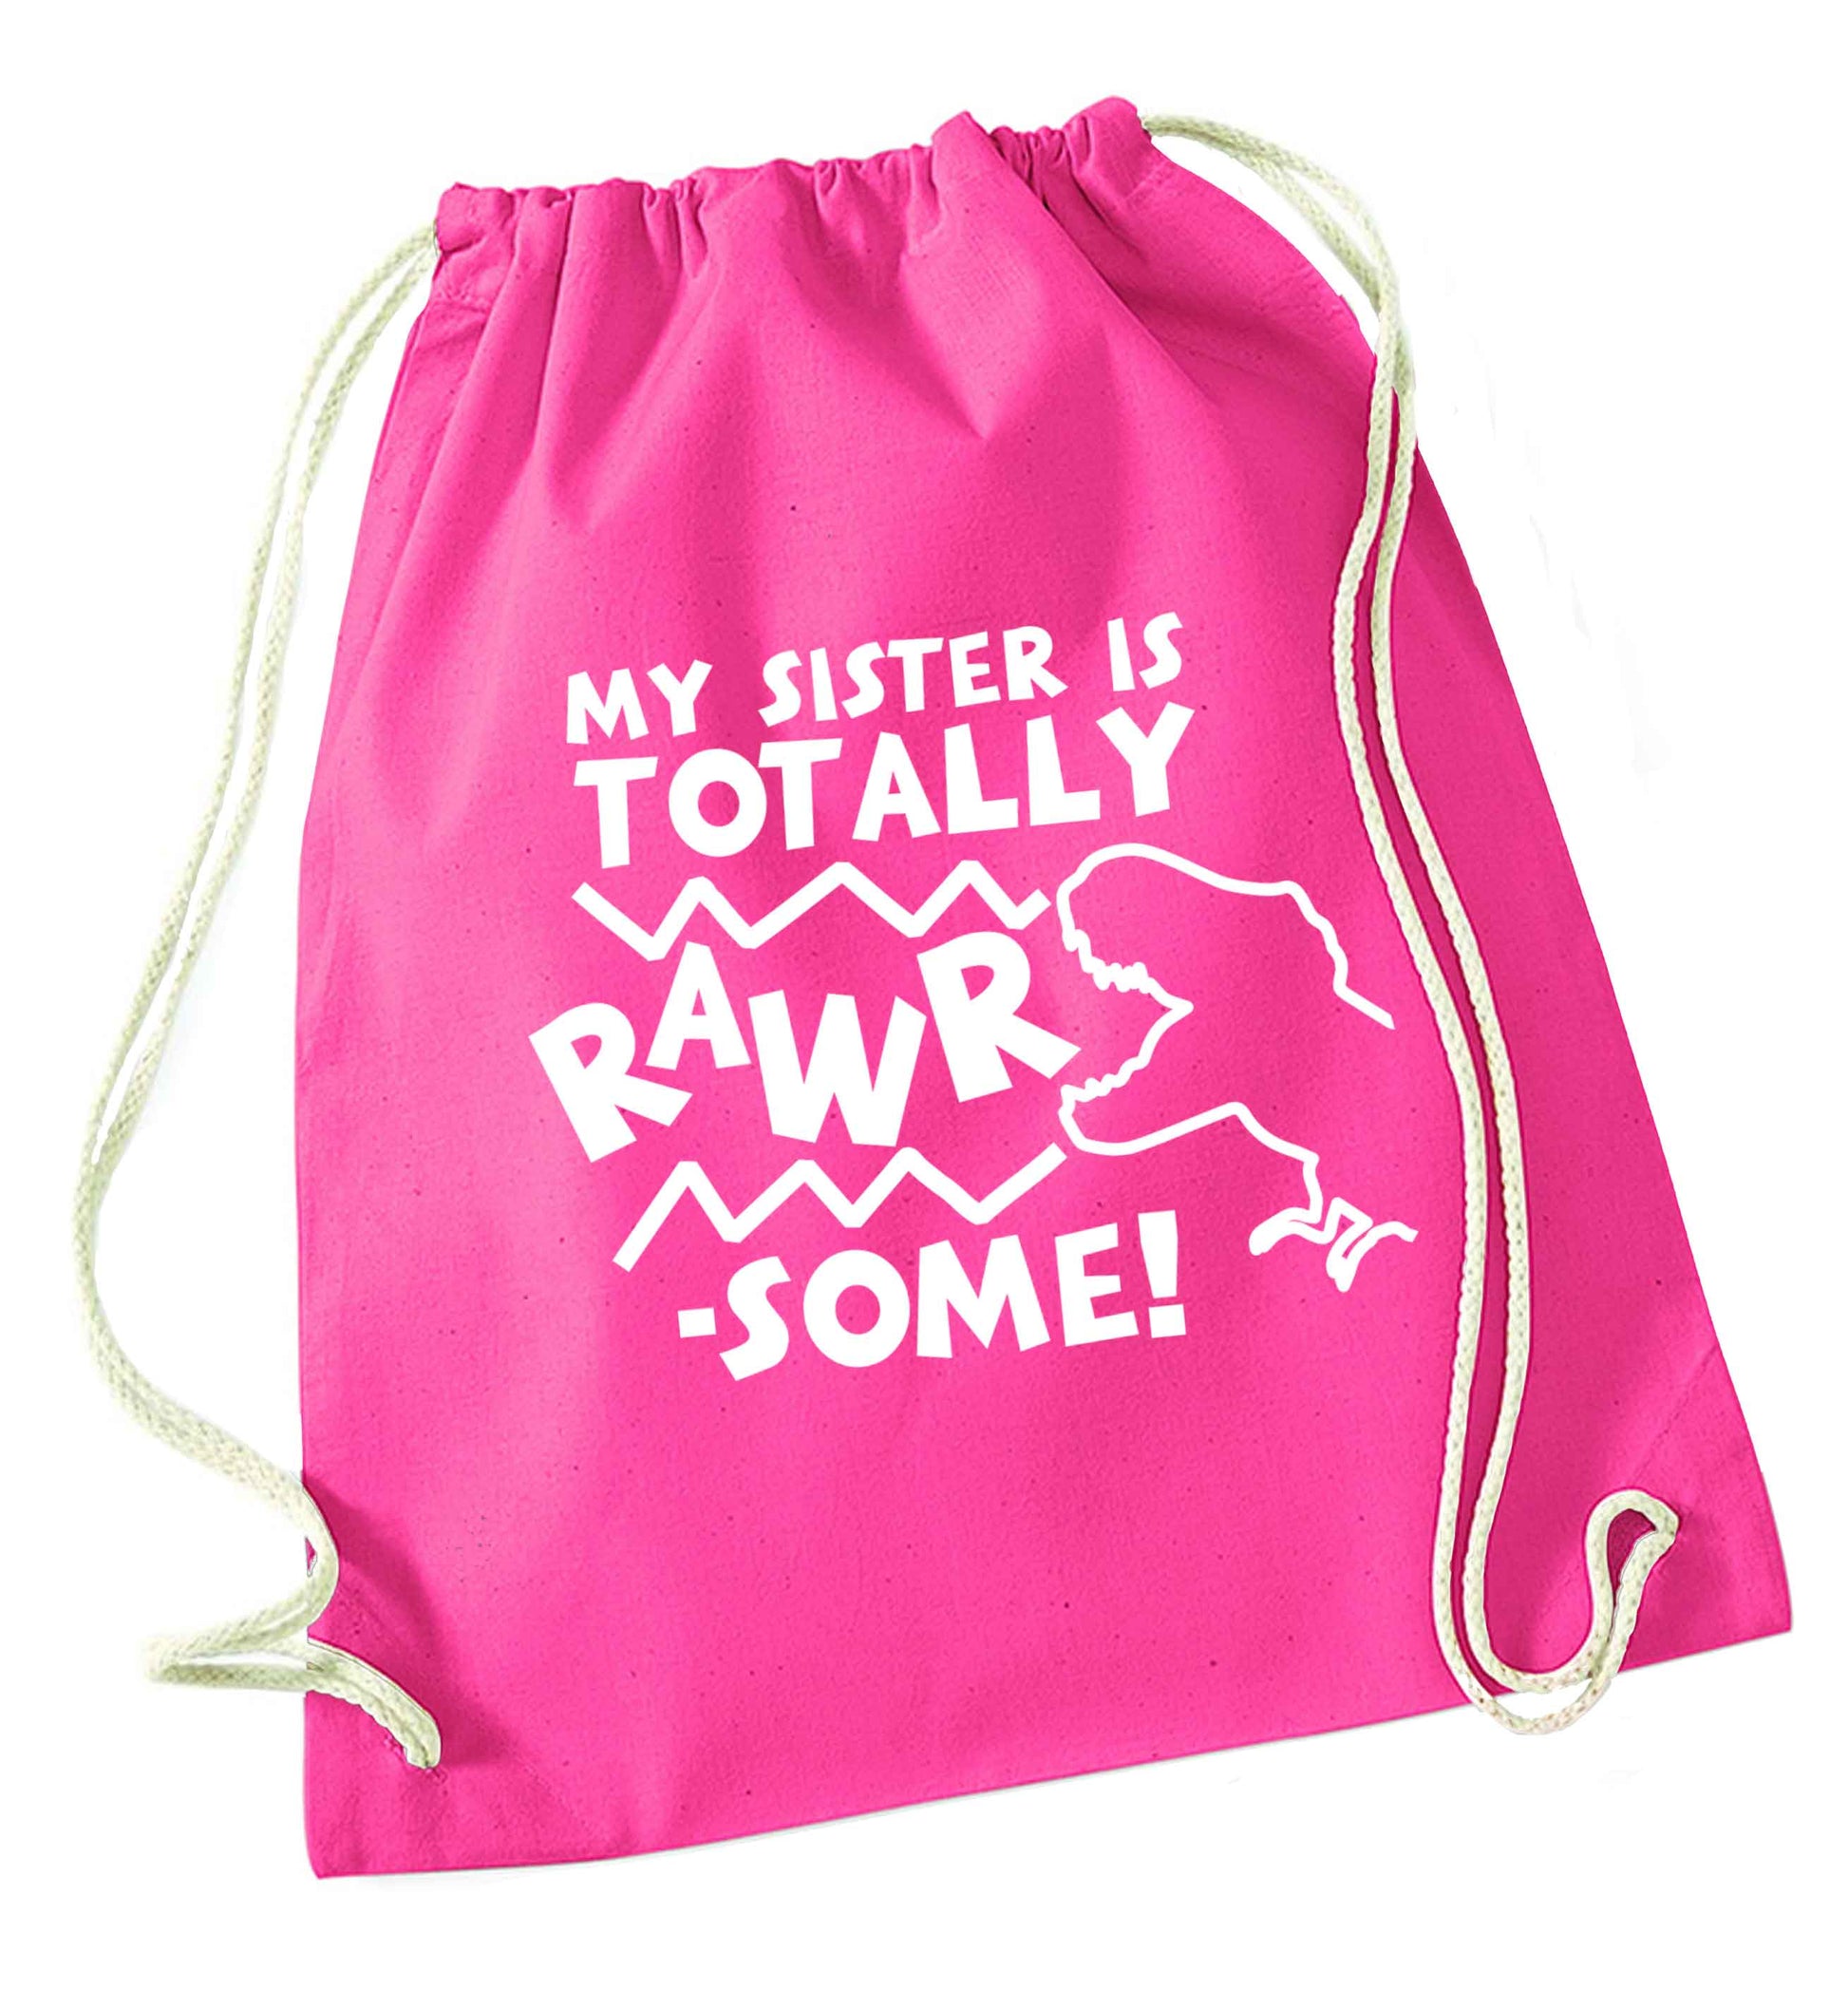 My sister is totally rawrsome pink drawstring bag